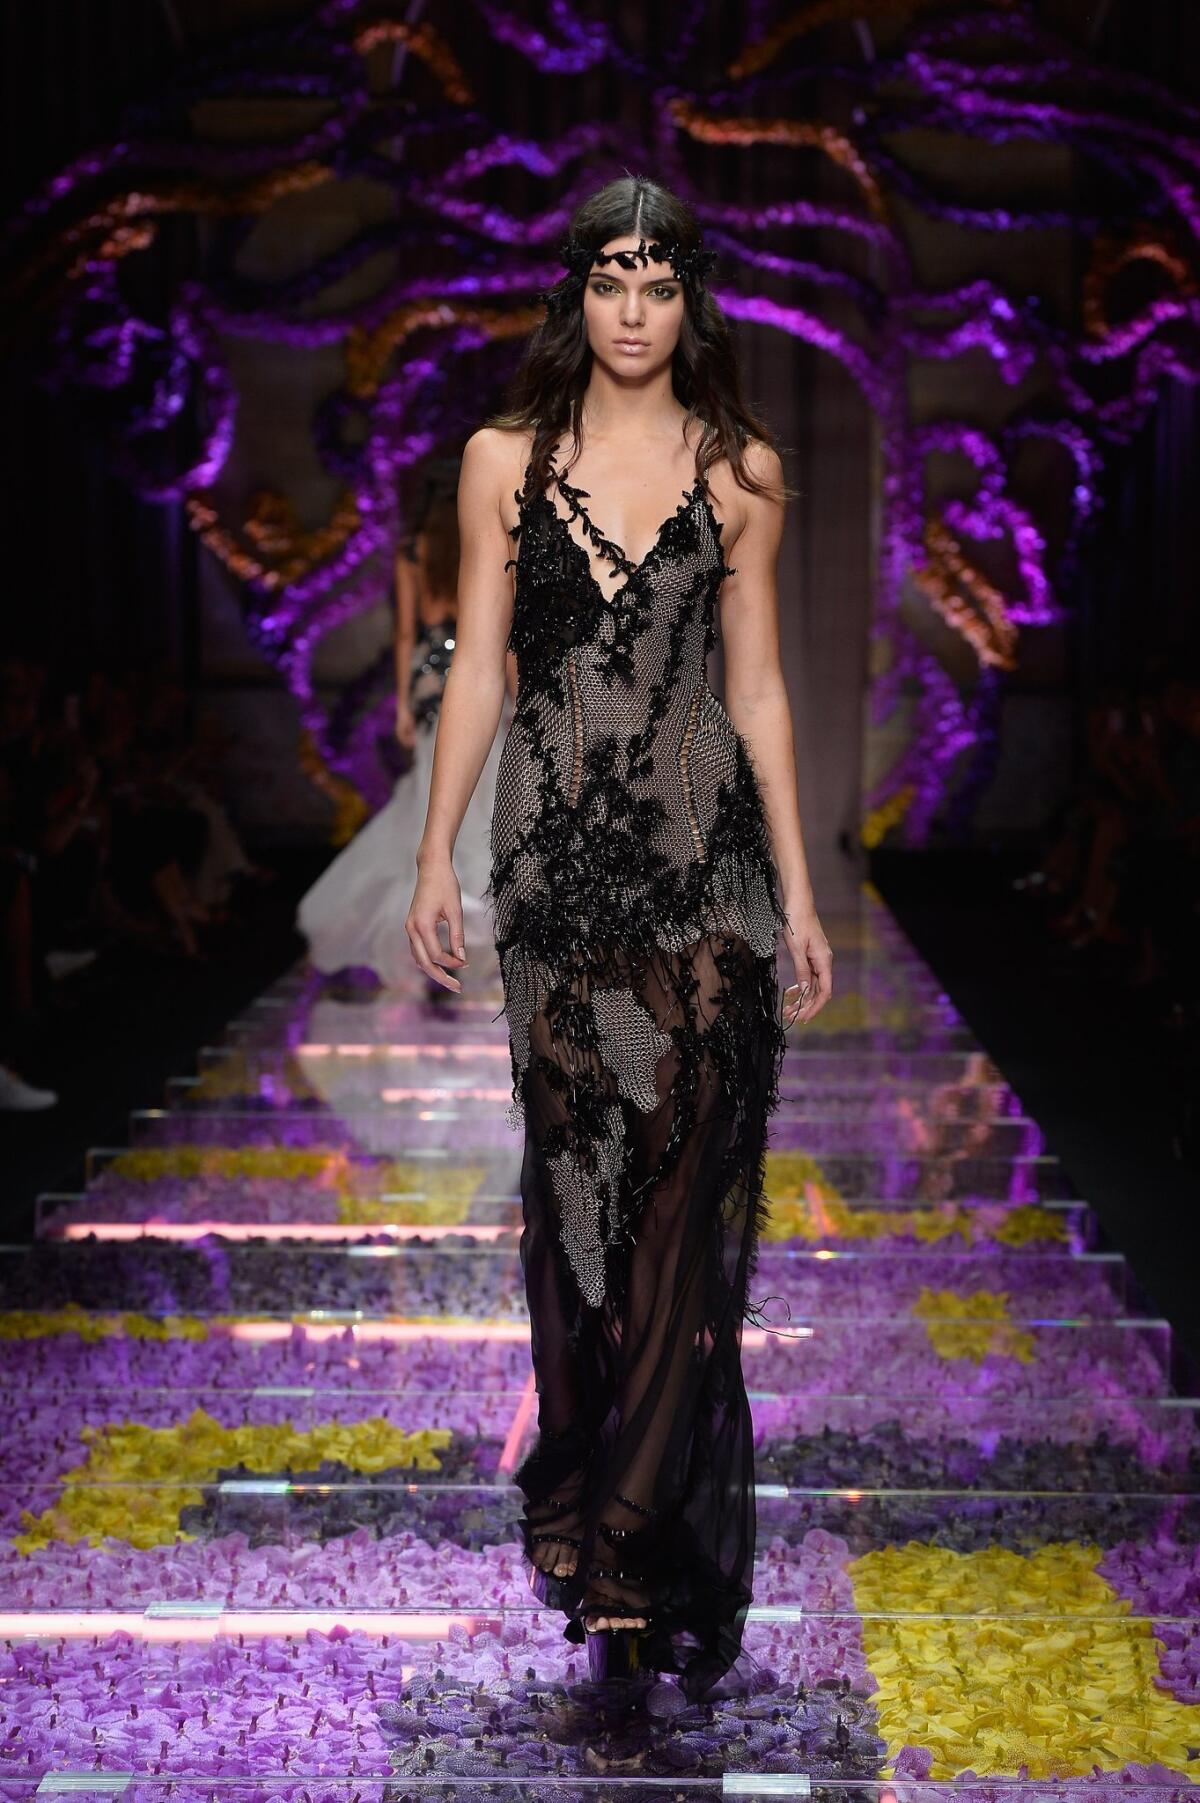 Kendall Jenner walks the runway during the Atelier Versace show.